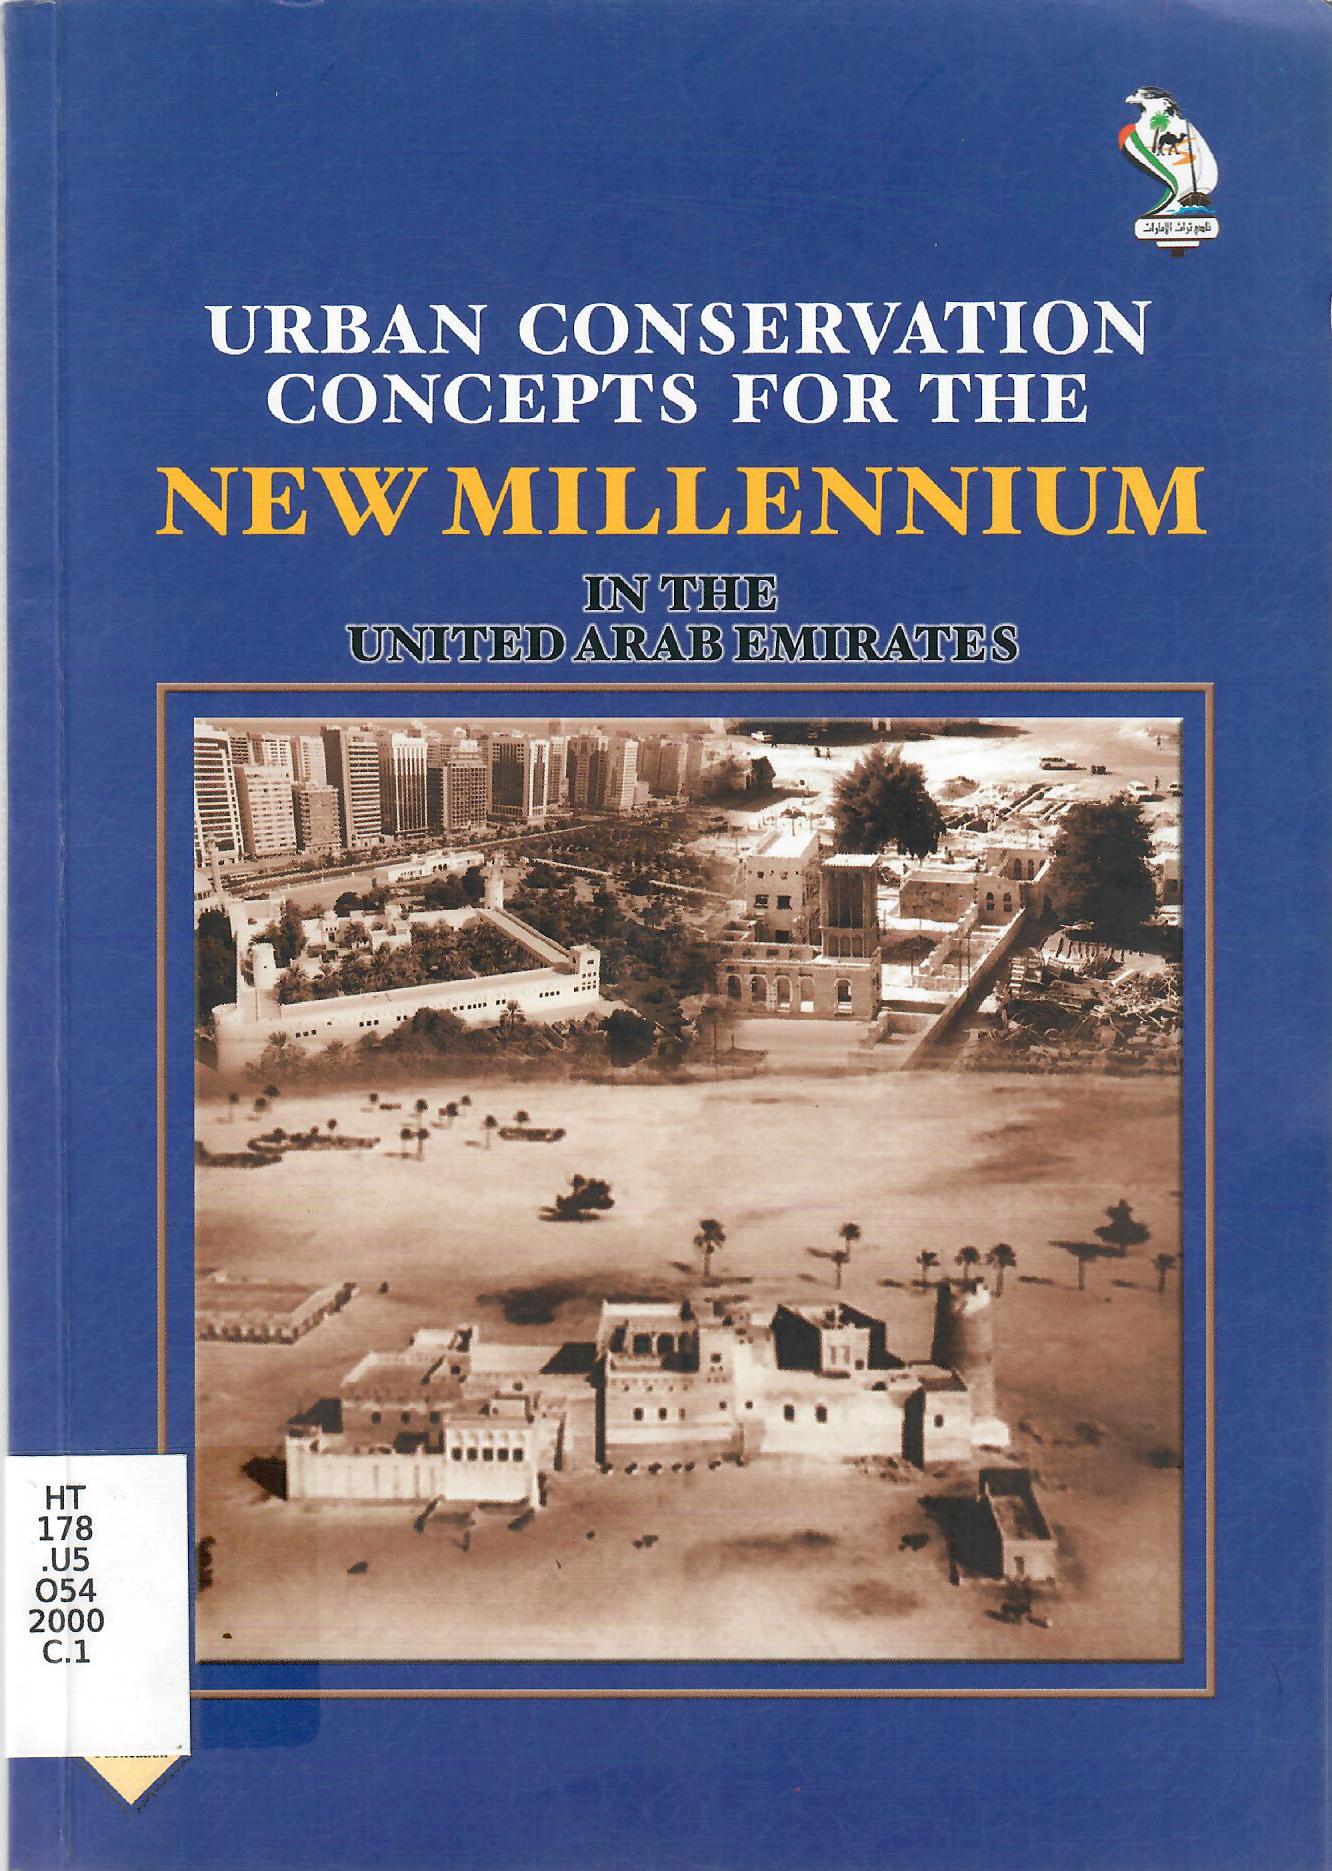 URBAN CONSERVATION CONCEPTS FOR THE NEW MILLENNIUM IN THE UNITES ARAB EMIRATES